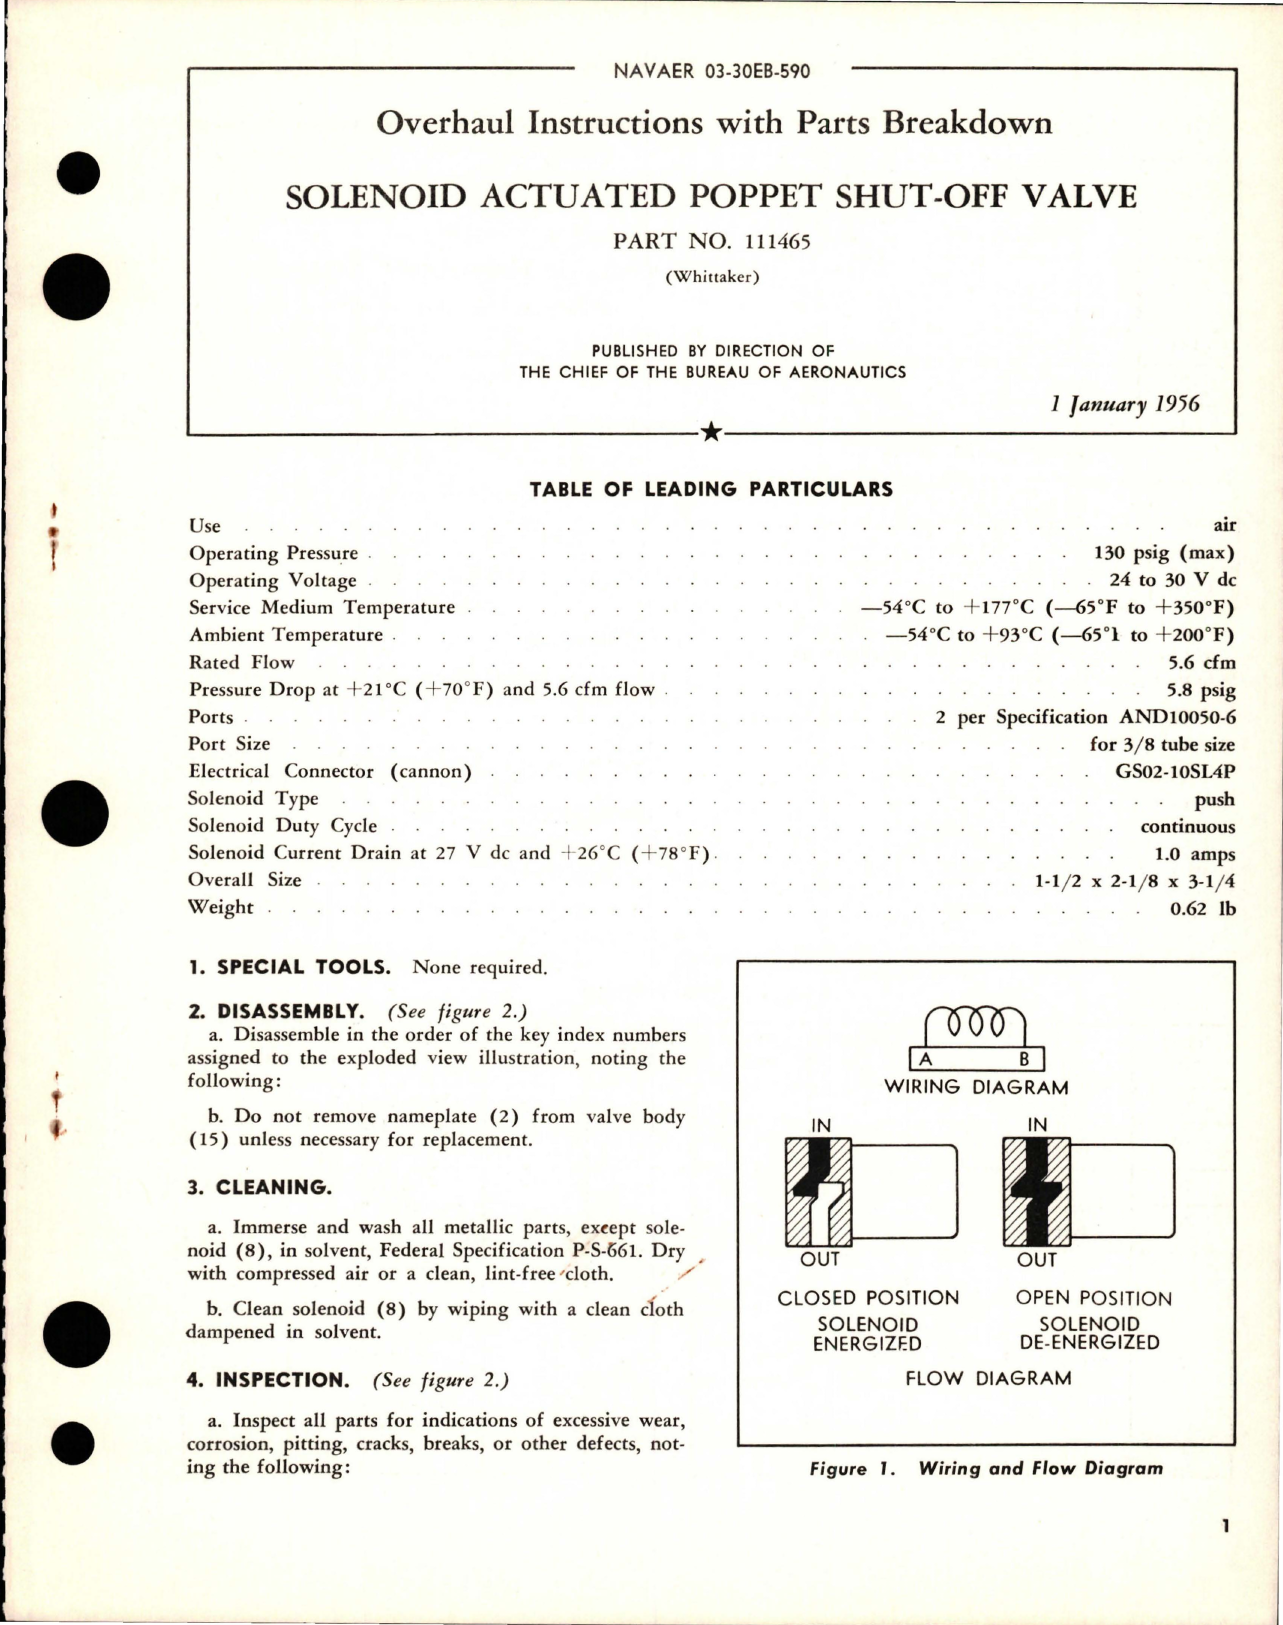 Sample page 1 from AirCorps Library document: Overhaul Instructions with Parts for Solenoid Actuated Poppet Shut Off Valve - Part 111465